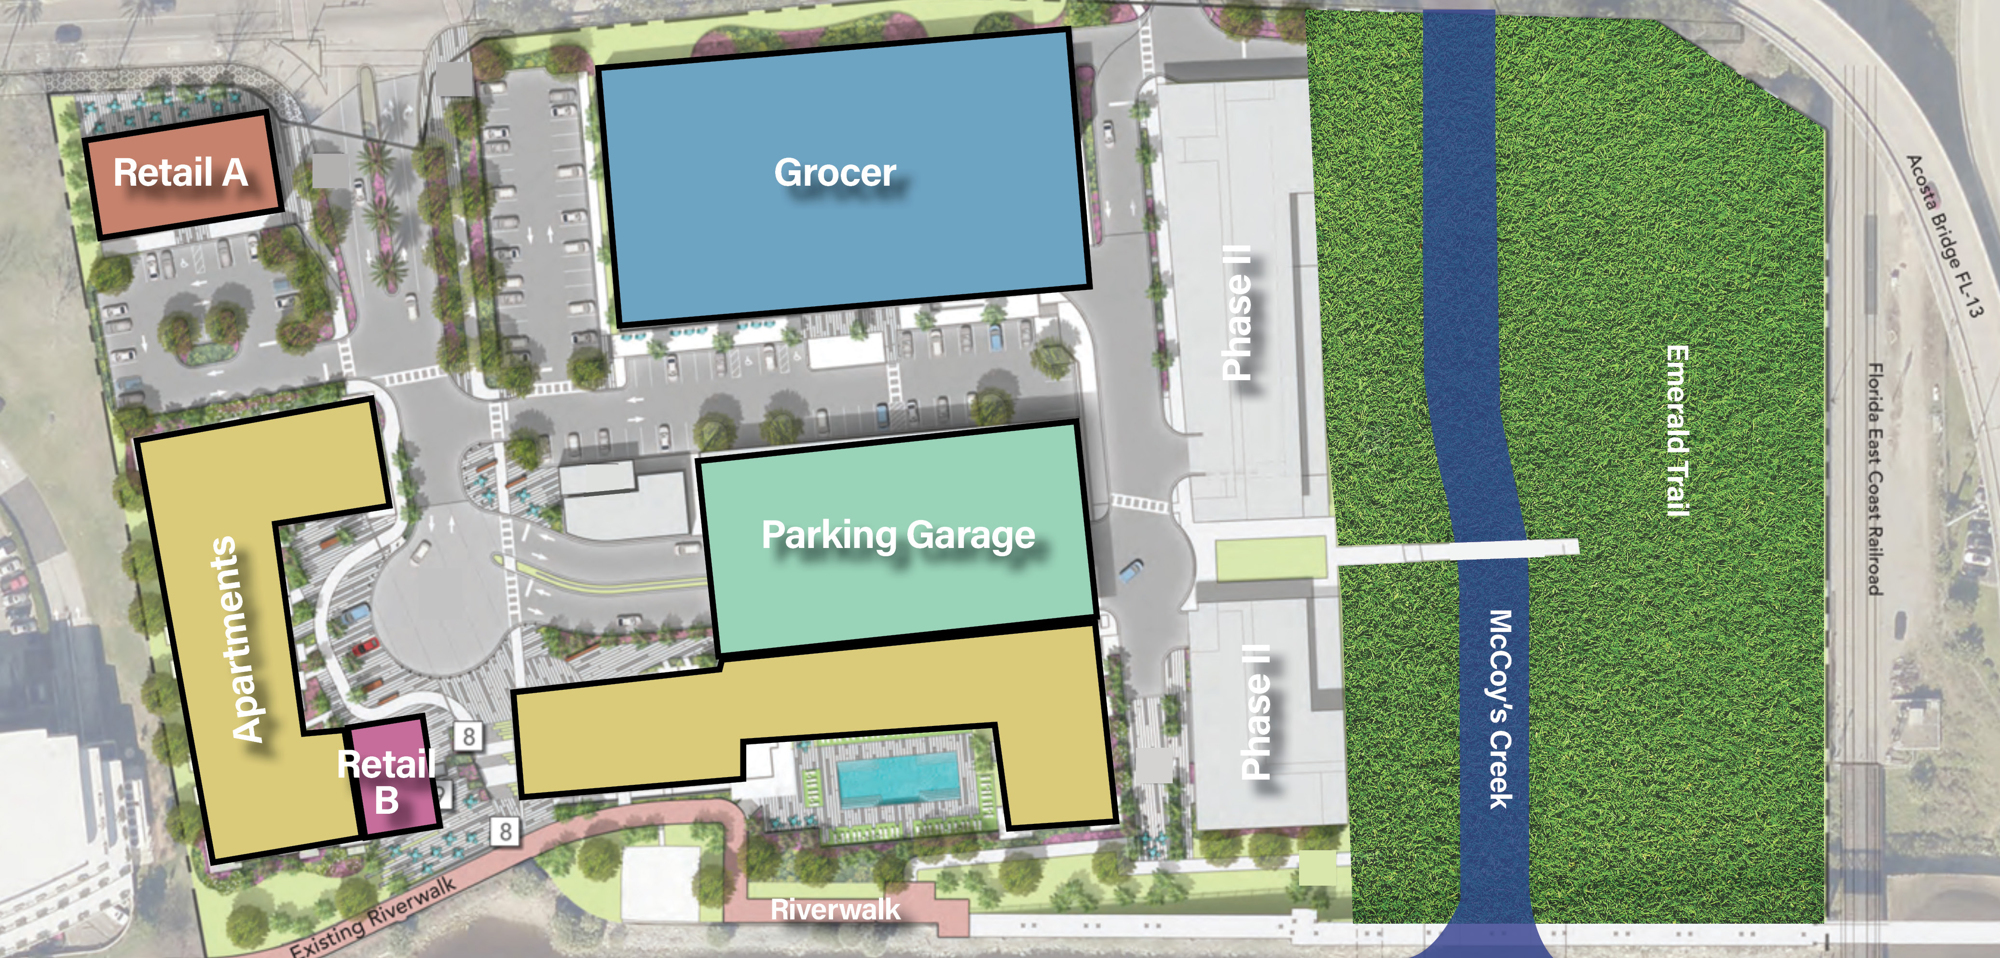 Apartments, restaurants, retail and a Whole Foods Market are planned at the site.